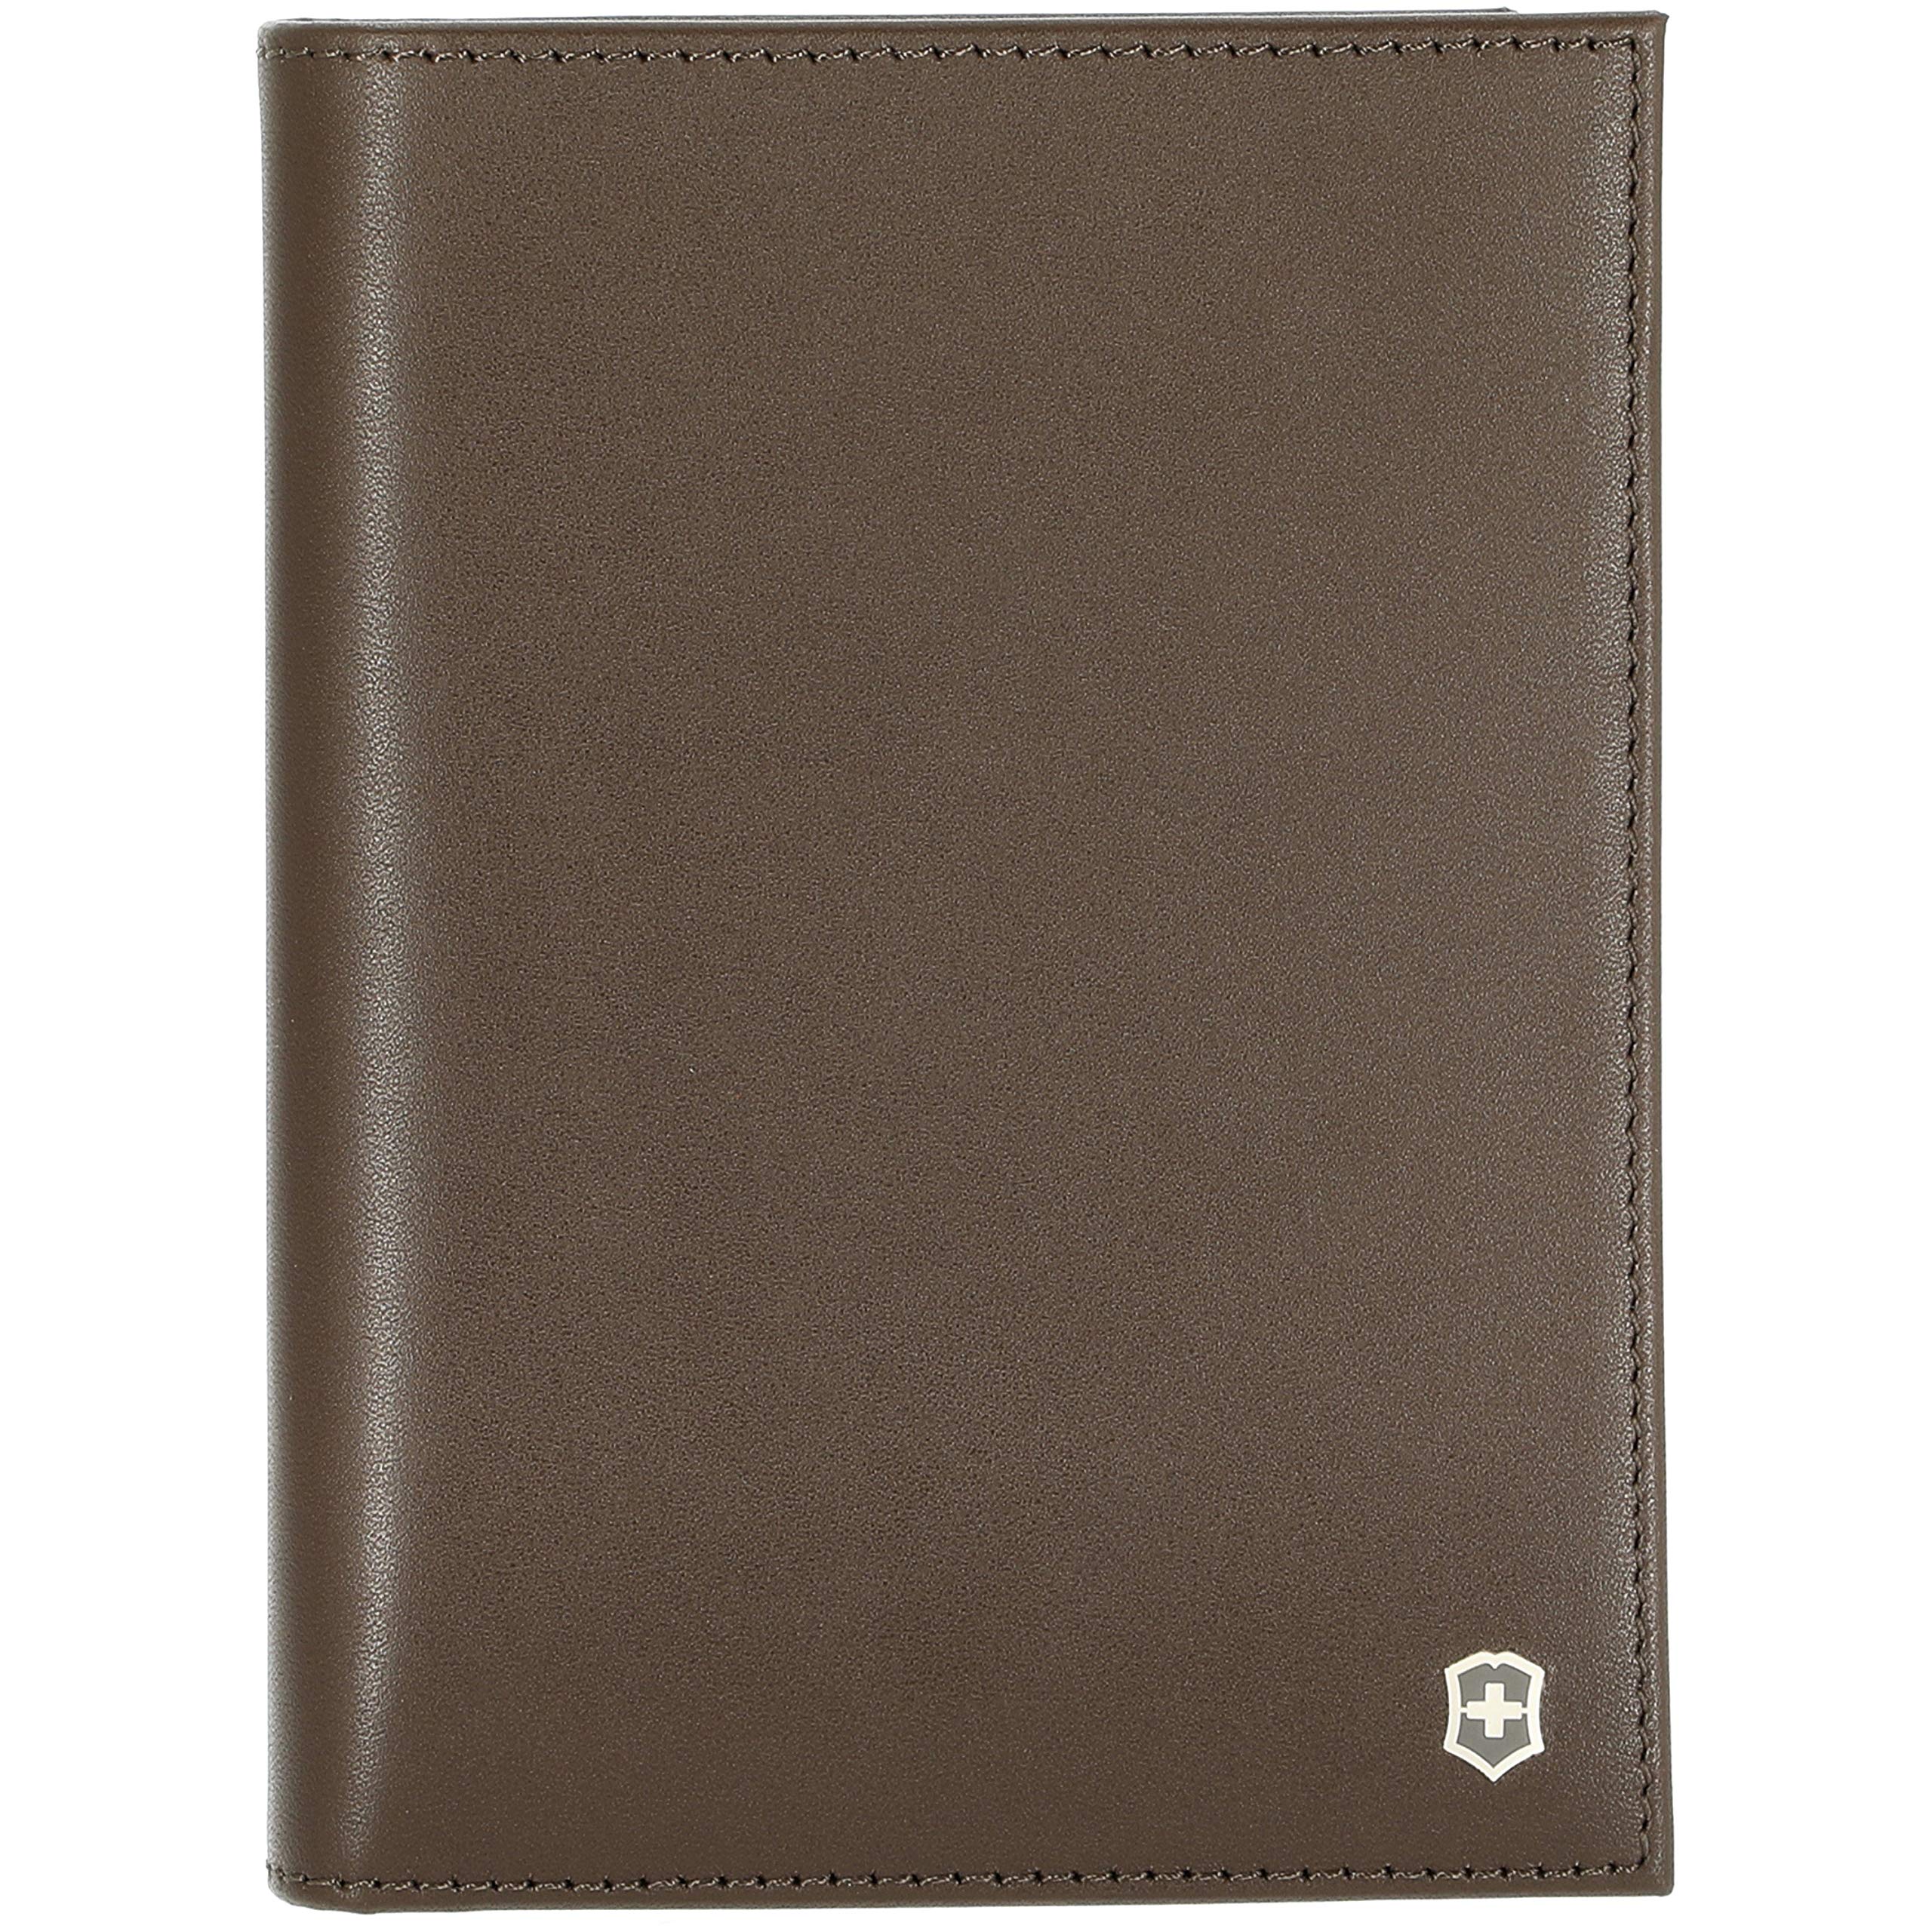 Victorinox Altius Edge Turing Zippered Leather Deluxe Clutch Wallet w/RFID  - Dark Earth